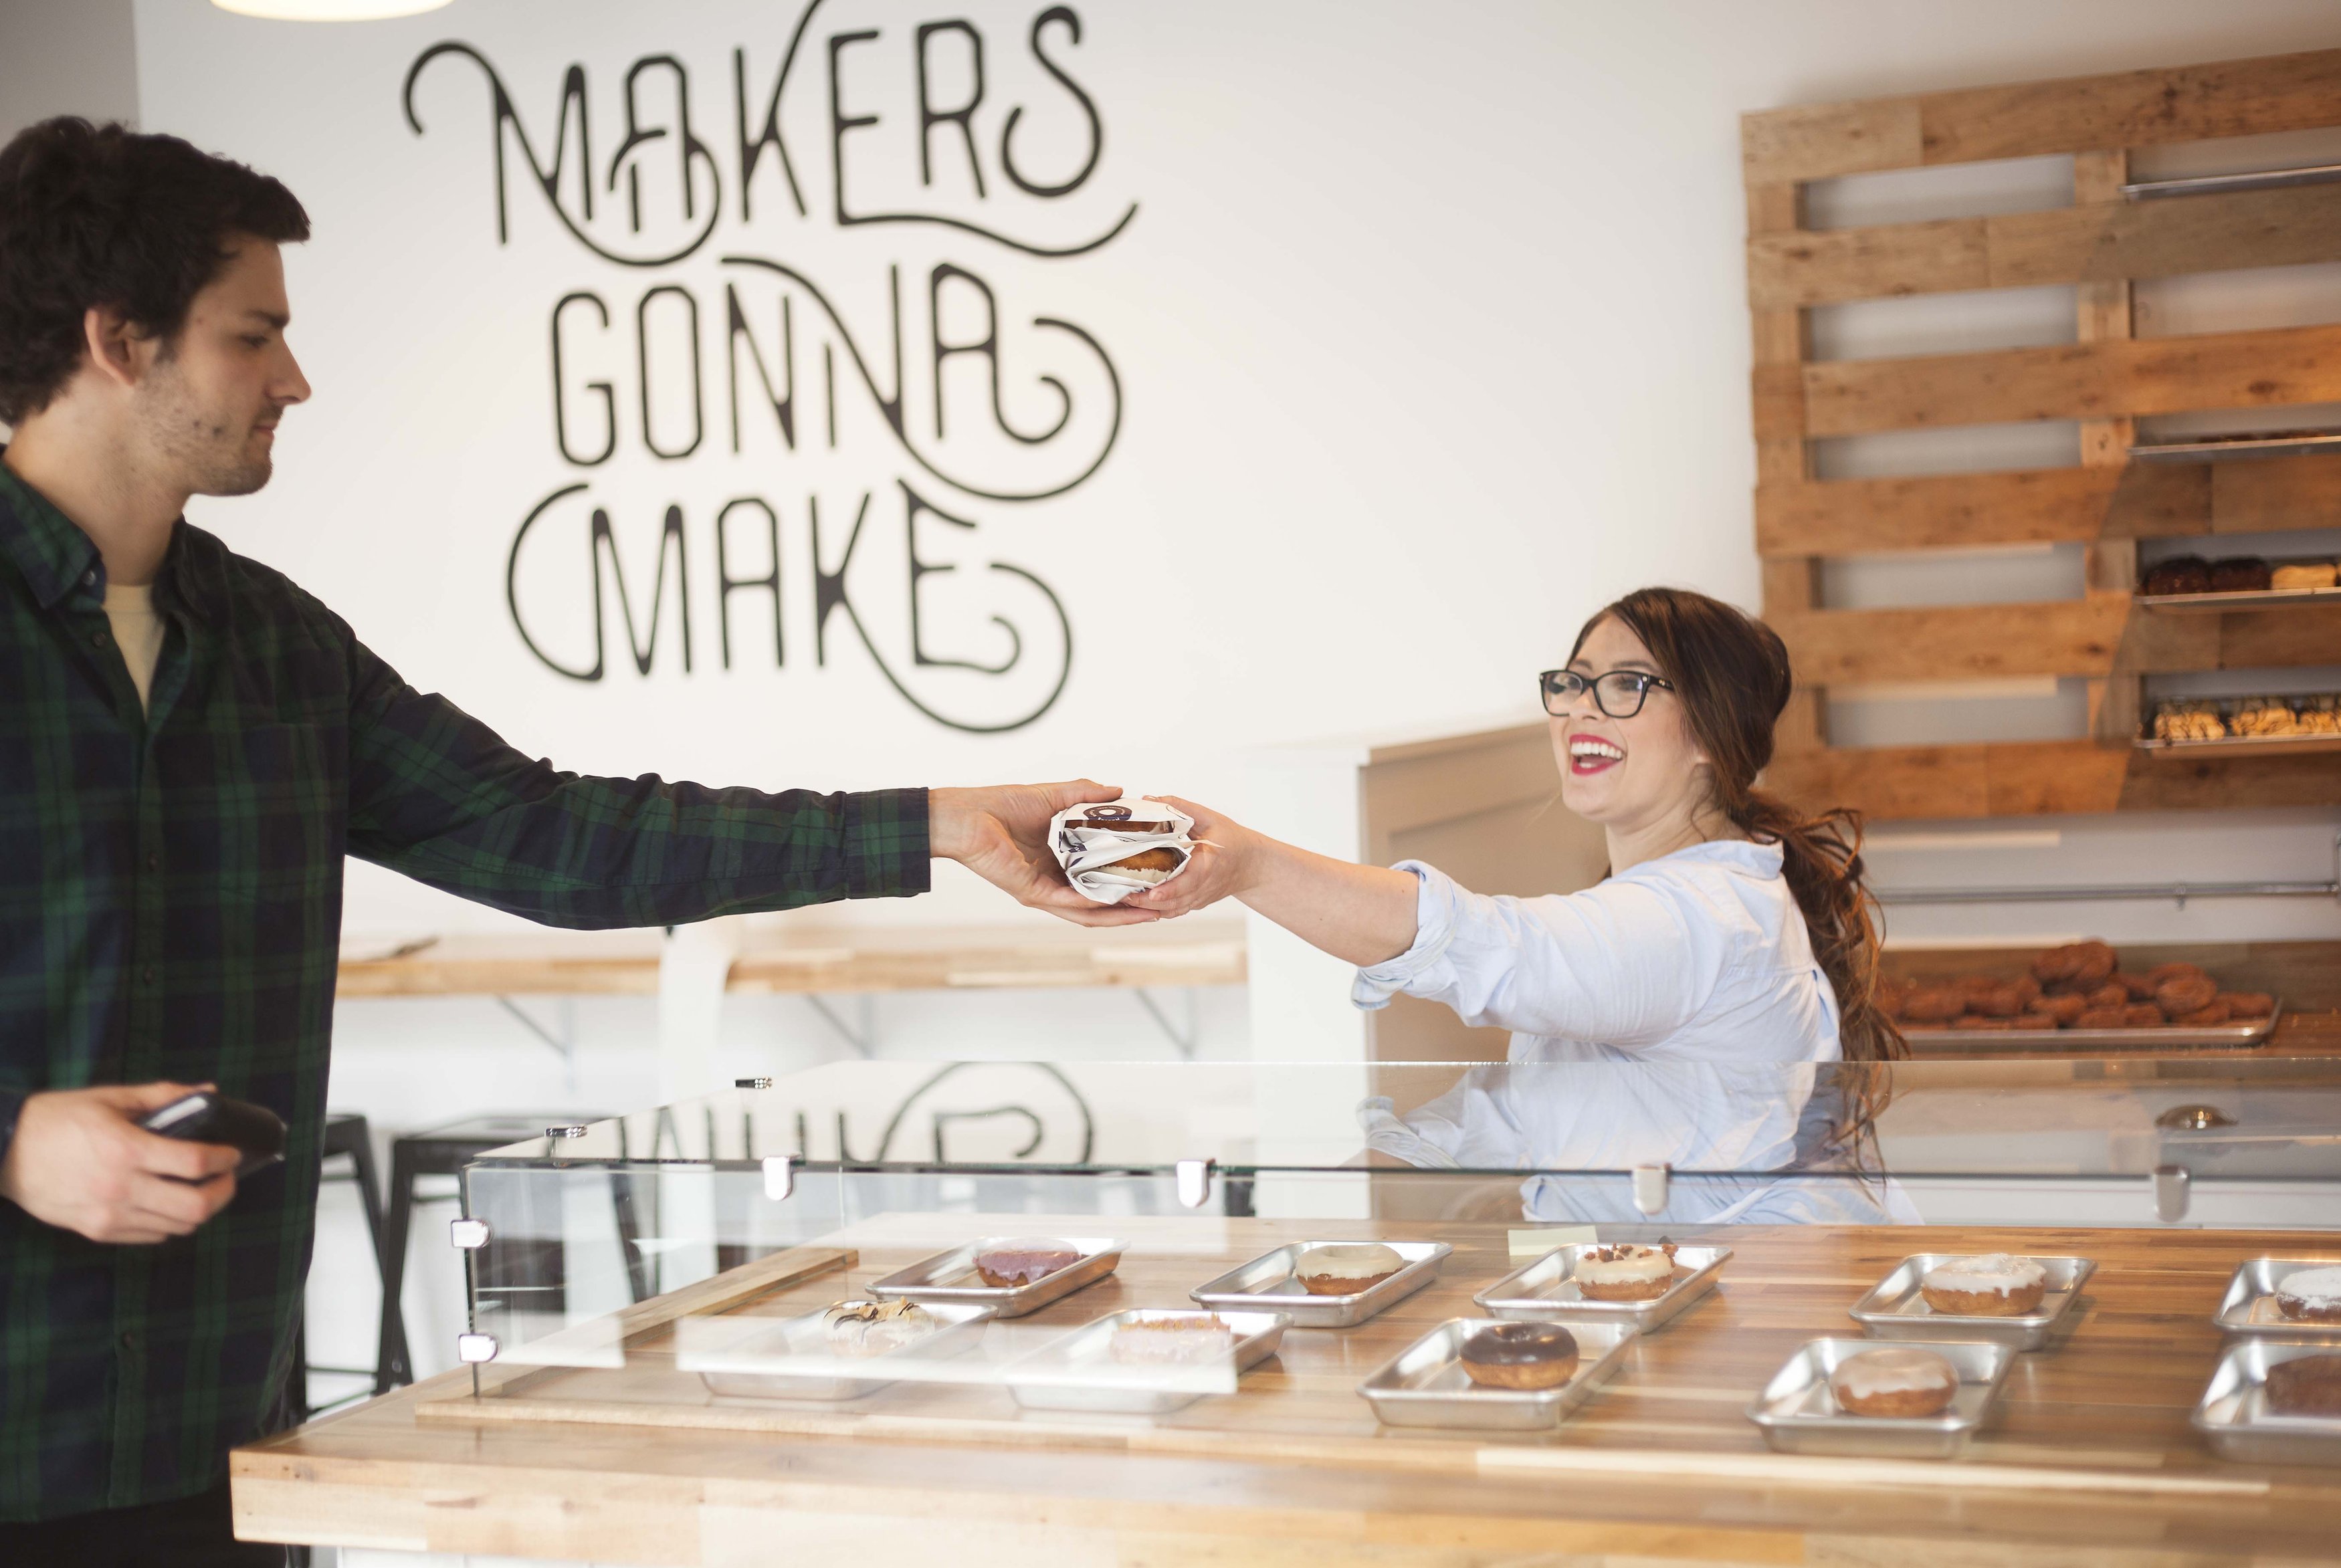 Makers Donuts Customer Service